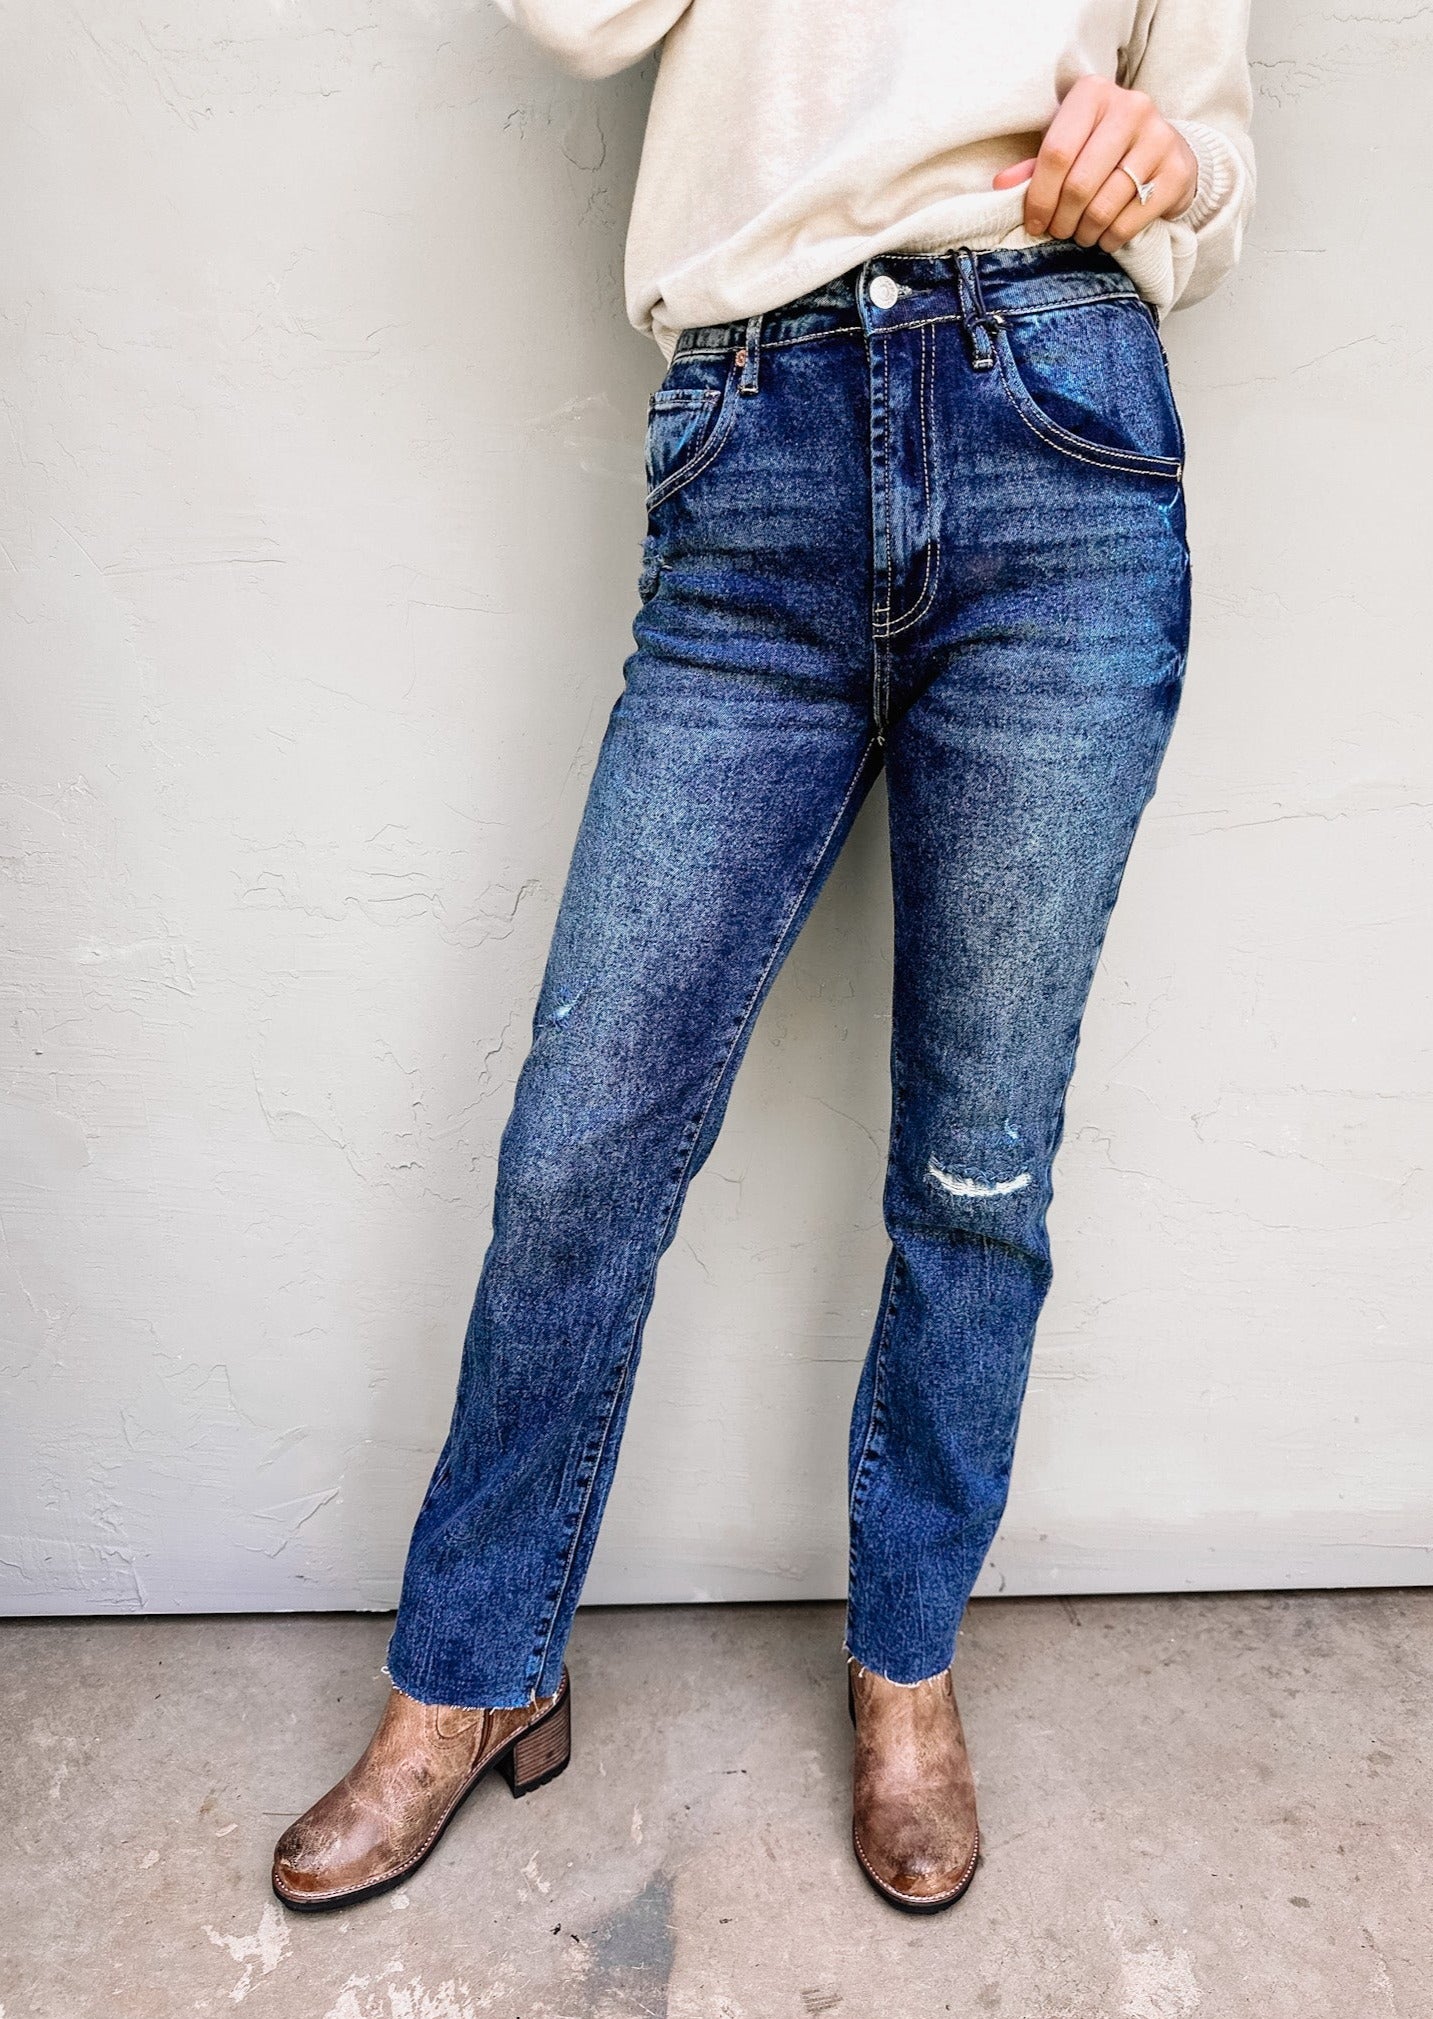 Articles of Society: The Village Jeans